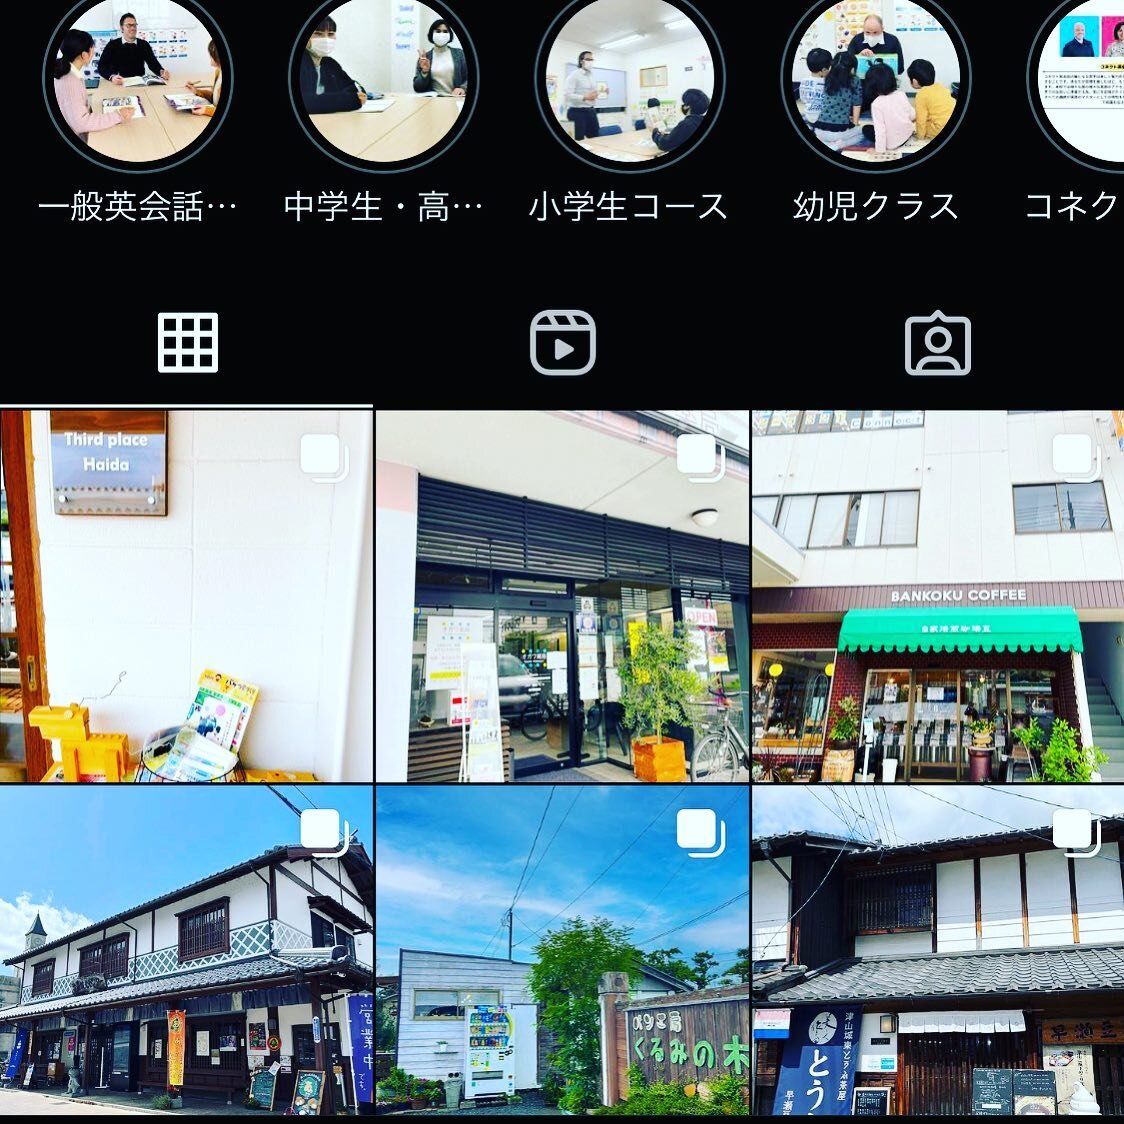 Please follow @connect_reception for details on our summer campaign, partnerships with local businesses and locations where you can pick up our brochure. 

@connect_reception 

#tsuyama #maniwa #okayama #english #津山 #津山市 #真庭 #真庭市 #岡山 #英語 #英会話